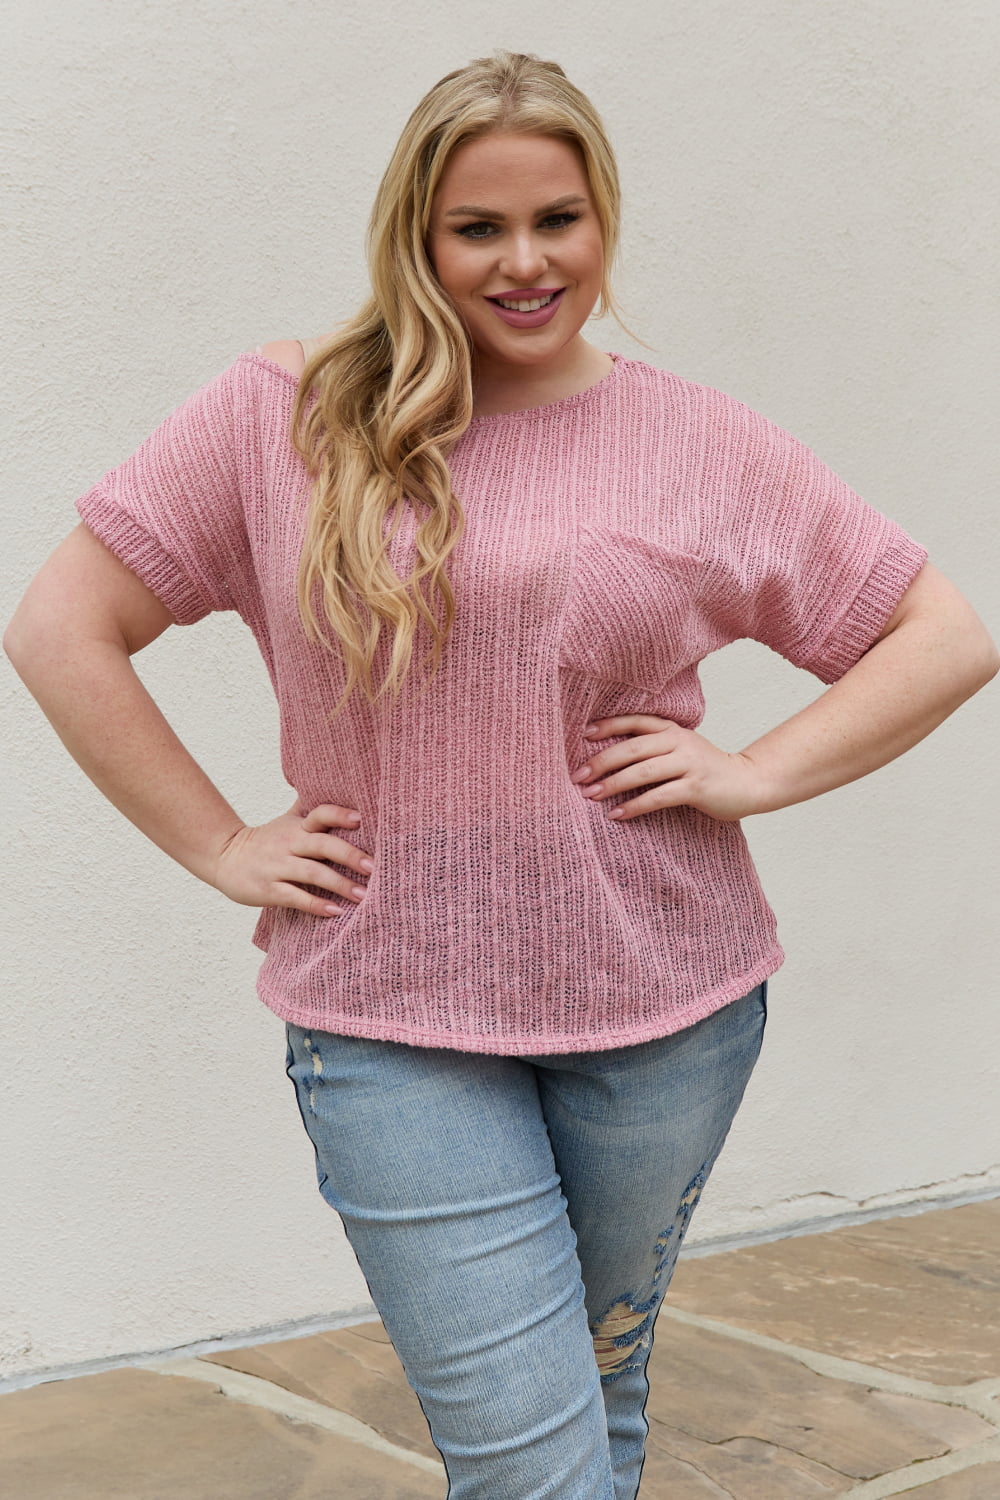 Chunky Knit Short Sleeve Top in Mauve - Camis & Tops - Shirts & Tops - 7 - 2024